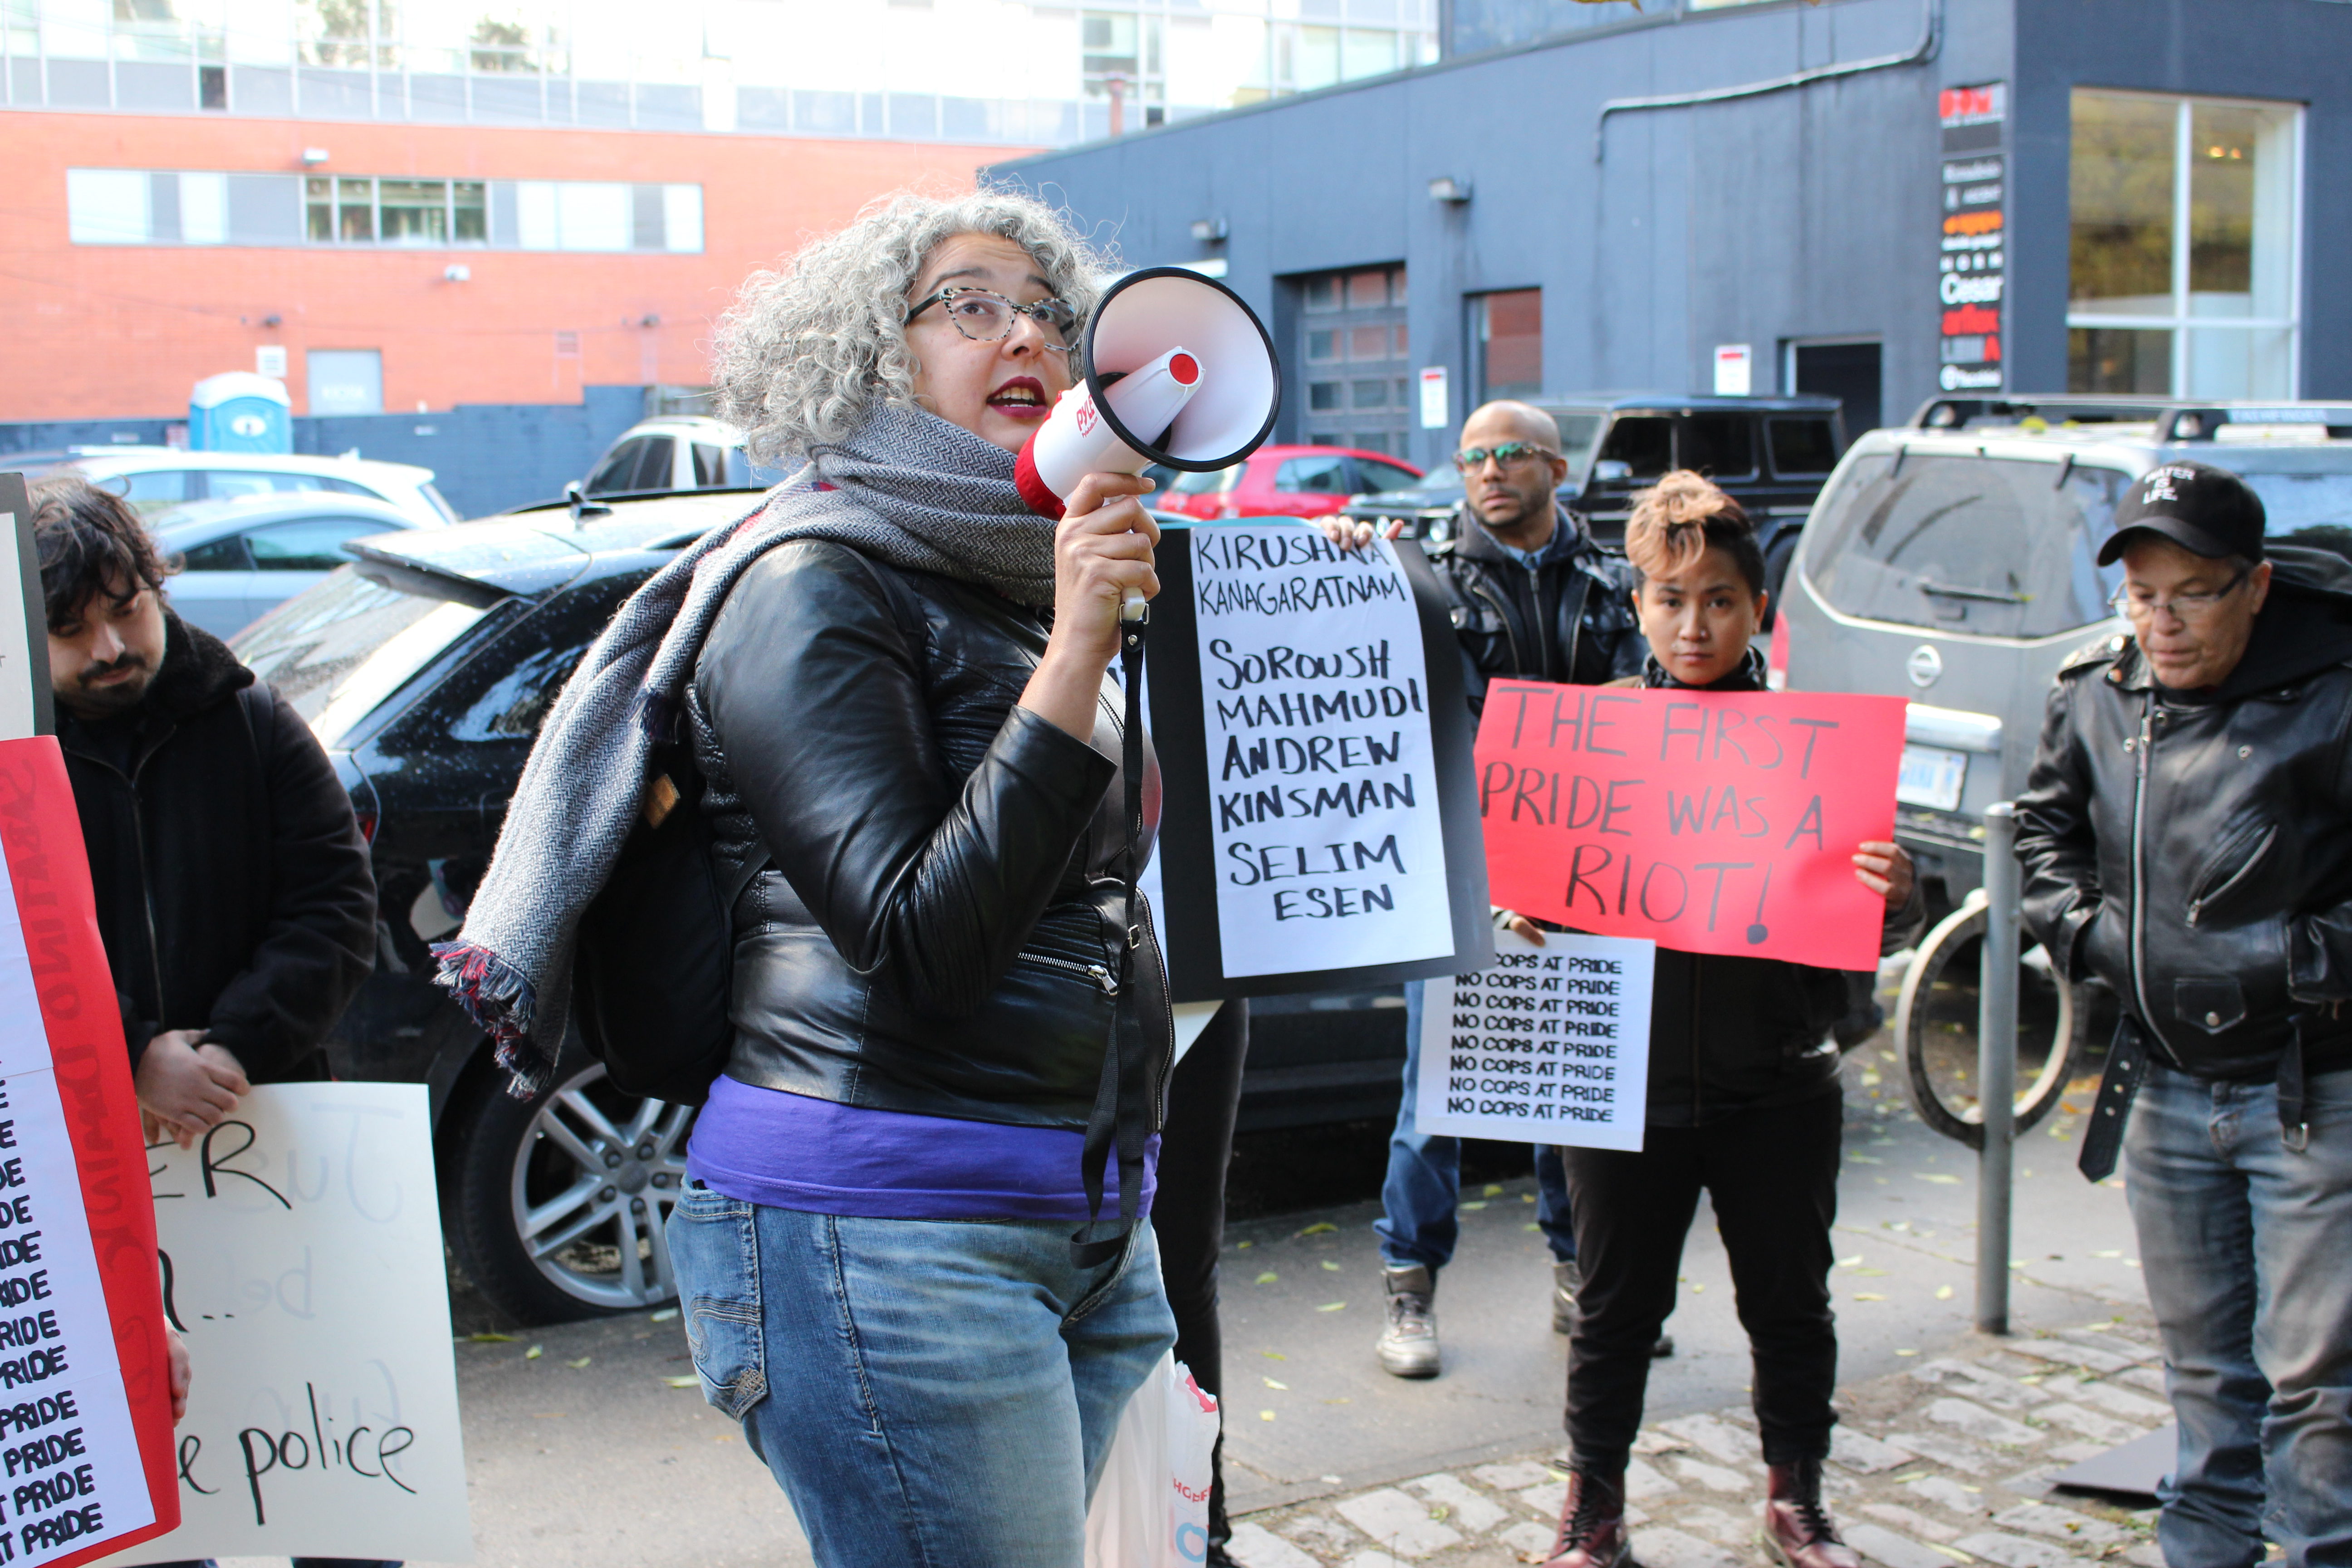 Woman with microphone surrounded by people holding signs.